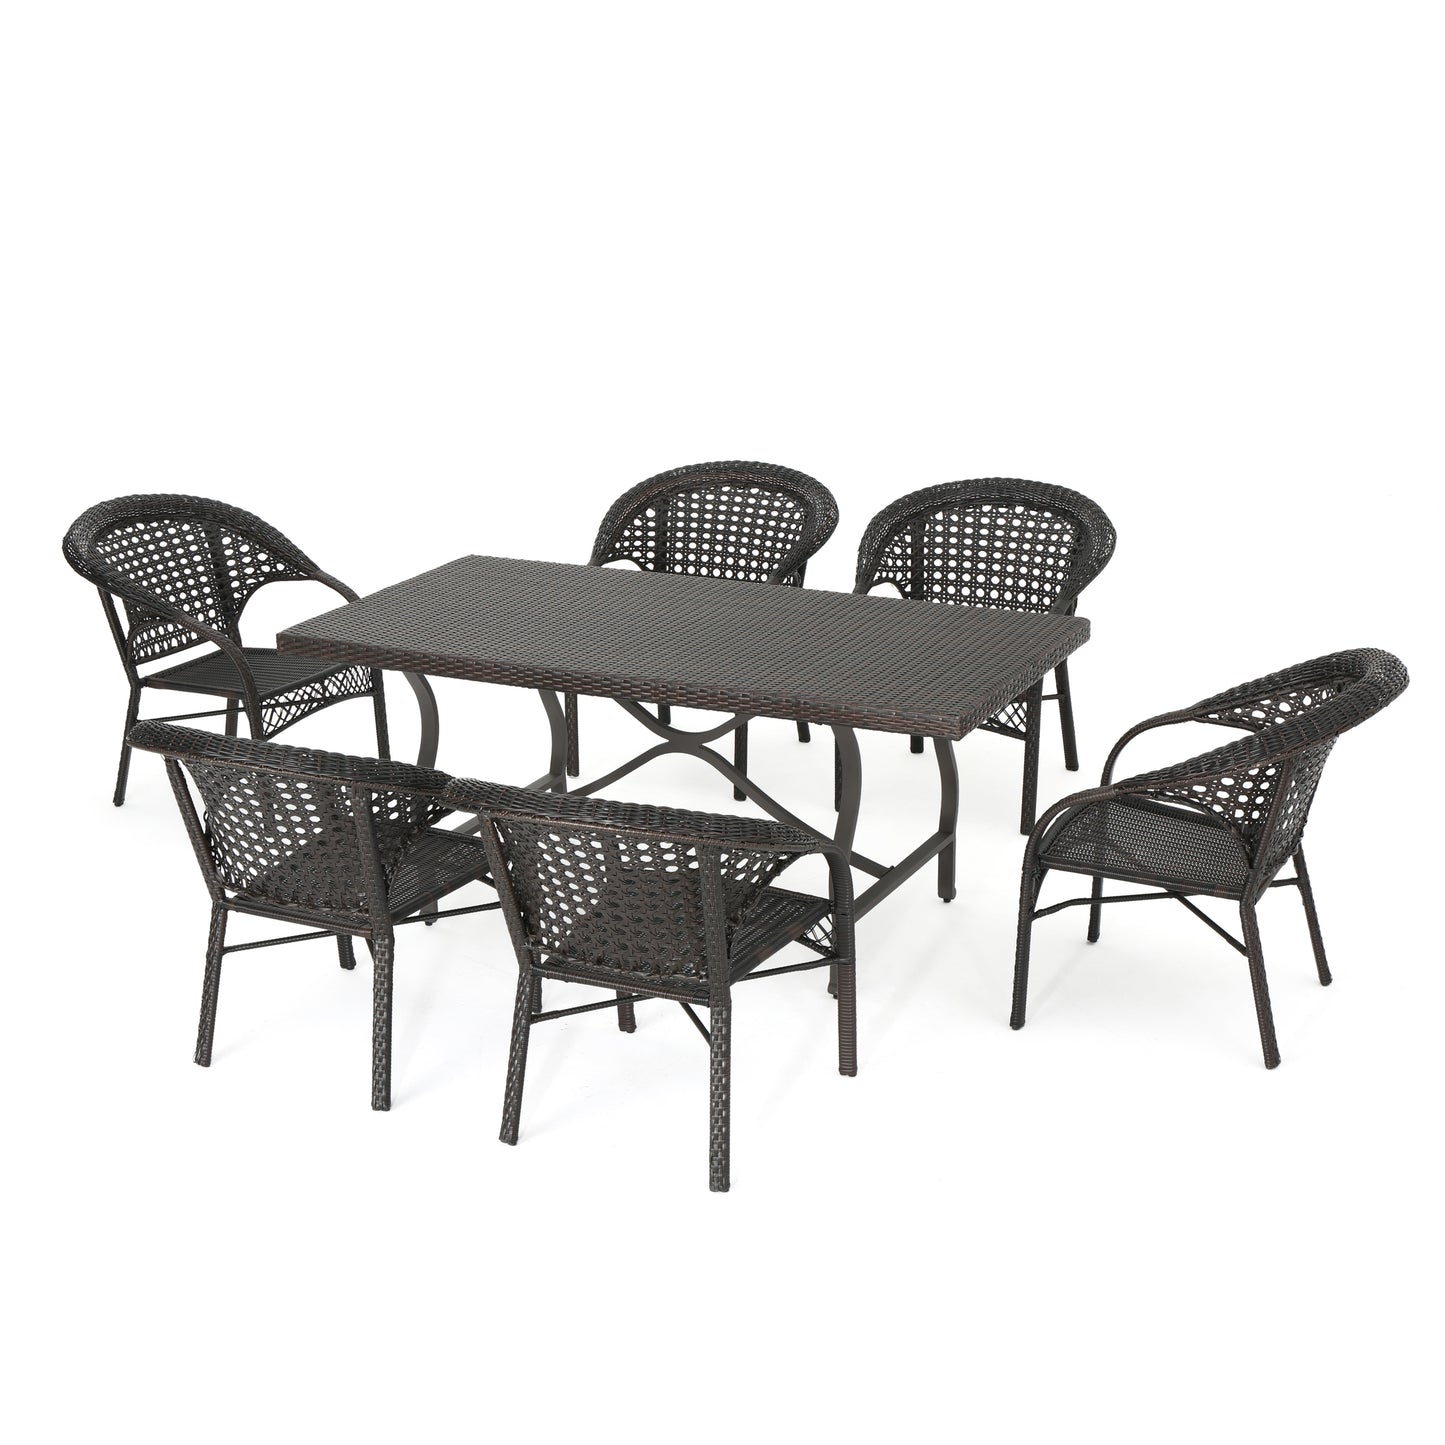 Lannister Outdoor 7 Piece Multi-brown Wicker Dining Set